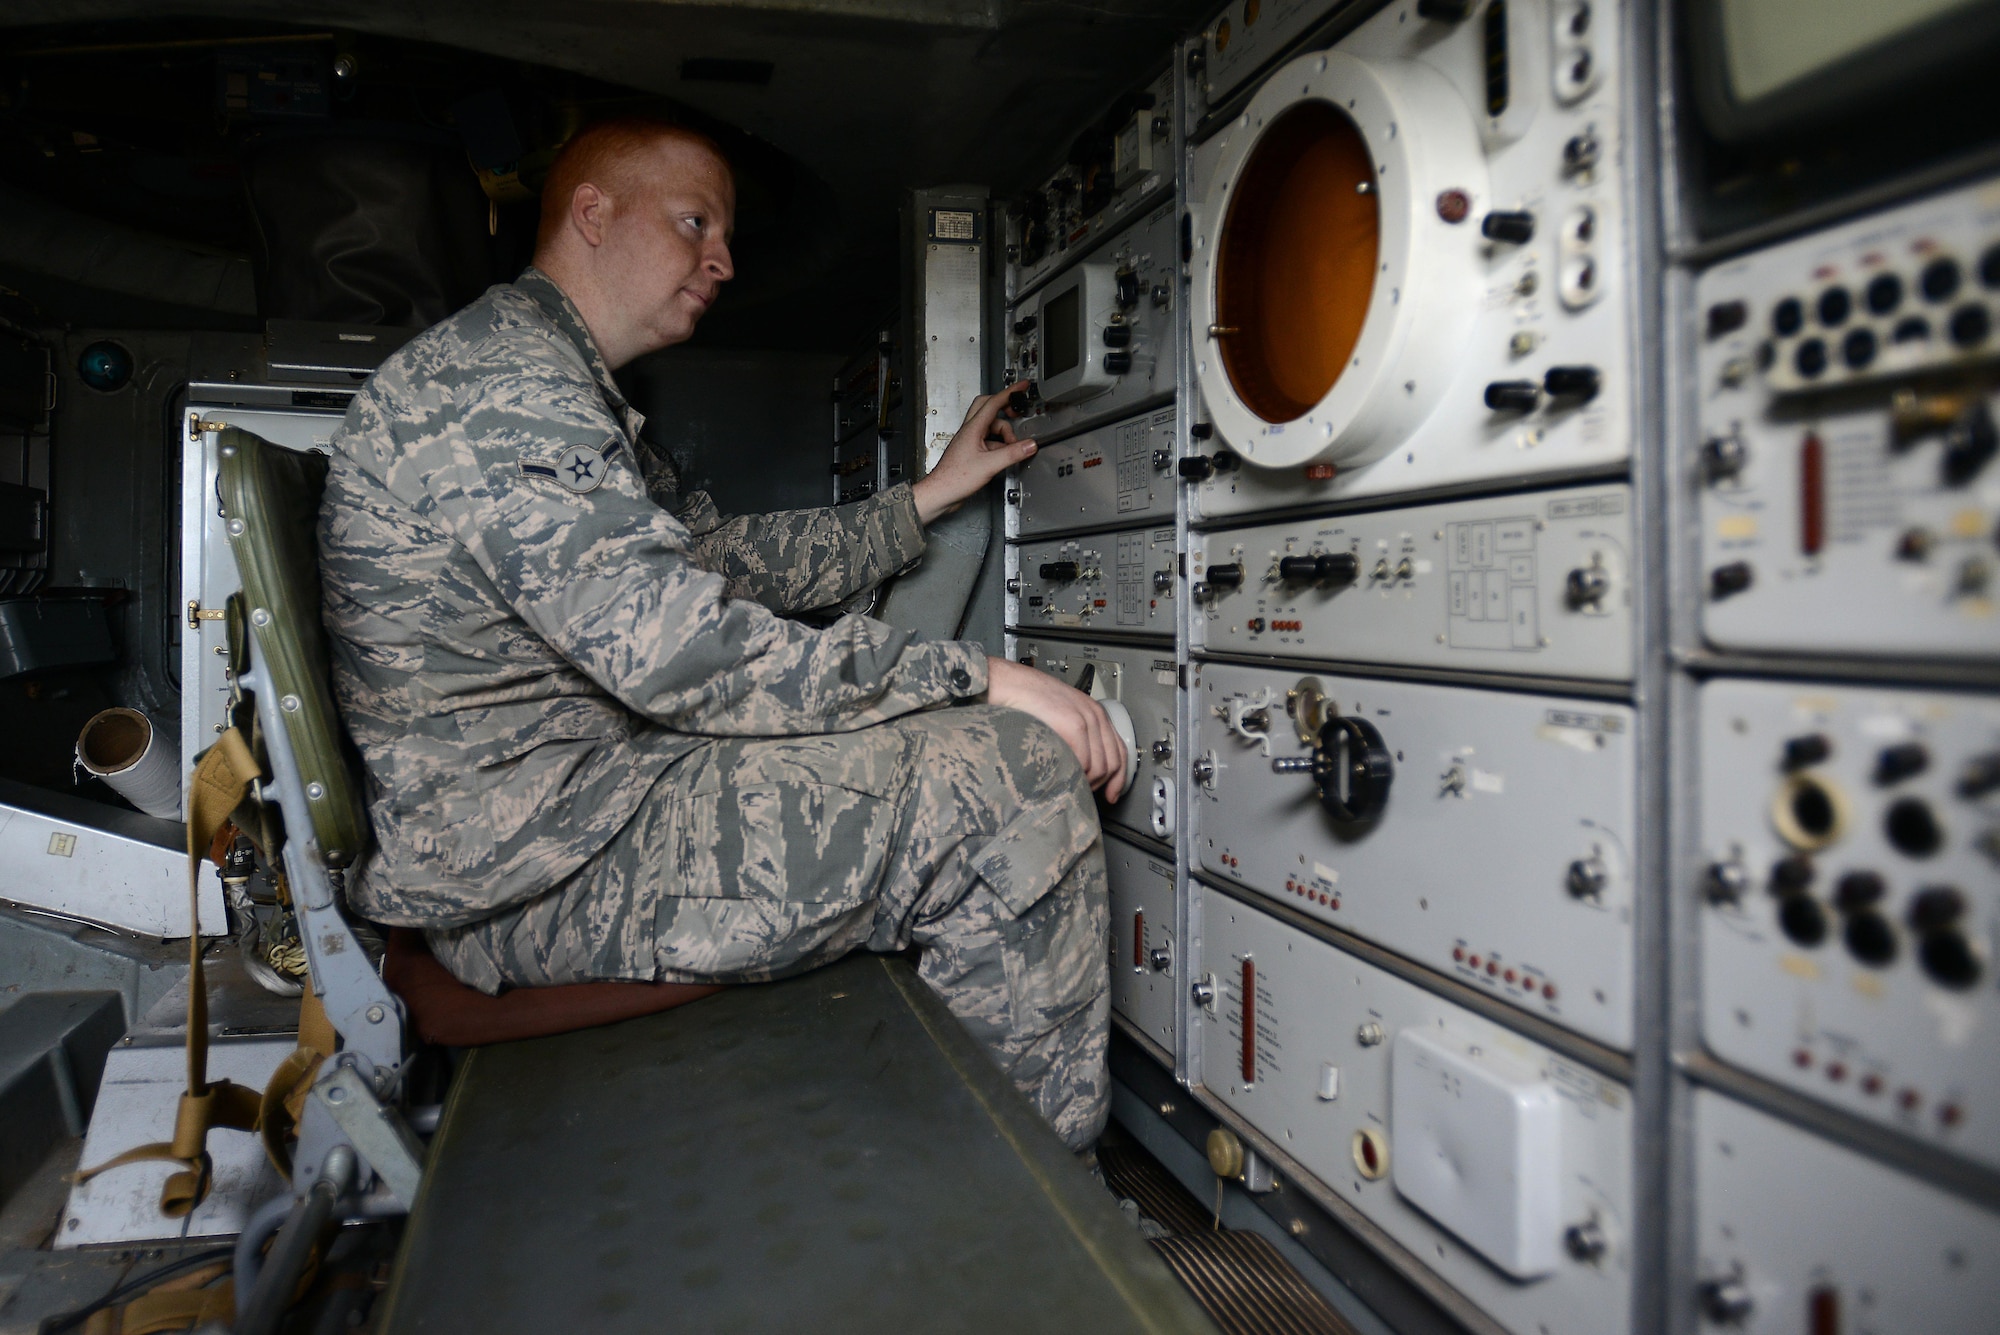 U.S. Air Force Airman Jackson Gaul, 20th Component Maintenance Squadron aircrew egress systems apprentice, sits inside an SA-8 Gecko “Land Roll” Launcher surface-to-air missile system at Shaw Air Force Base, S.C., Jan. 20, 2017. The SAM was provided for the informational session by the Defense Intelligence Agency’s Missile Space Intelligence Center, and the 46th Test Squadron assigned to Eglin AFB, Fla. (U.S. Air Force photo by Airman 1st Class Kelsey Tucker)